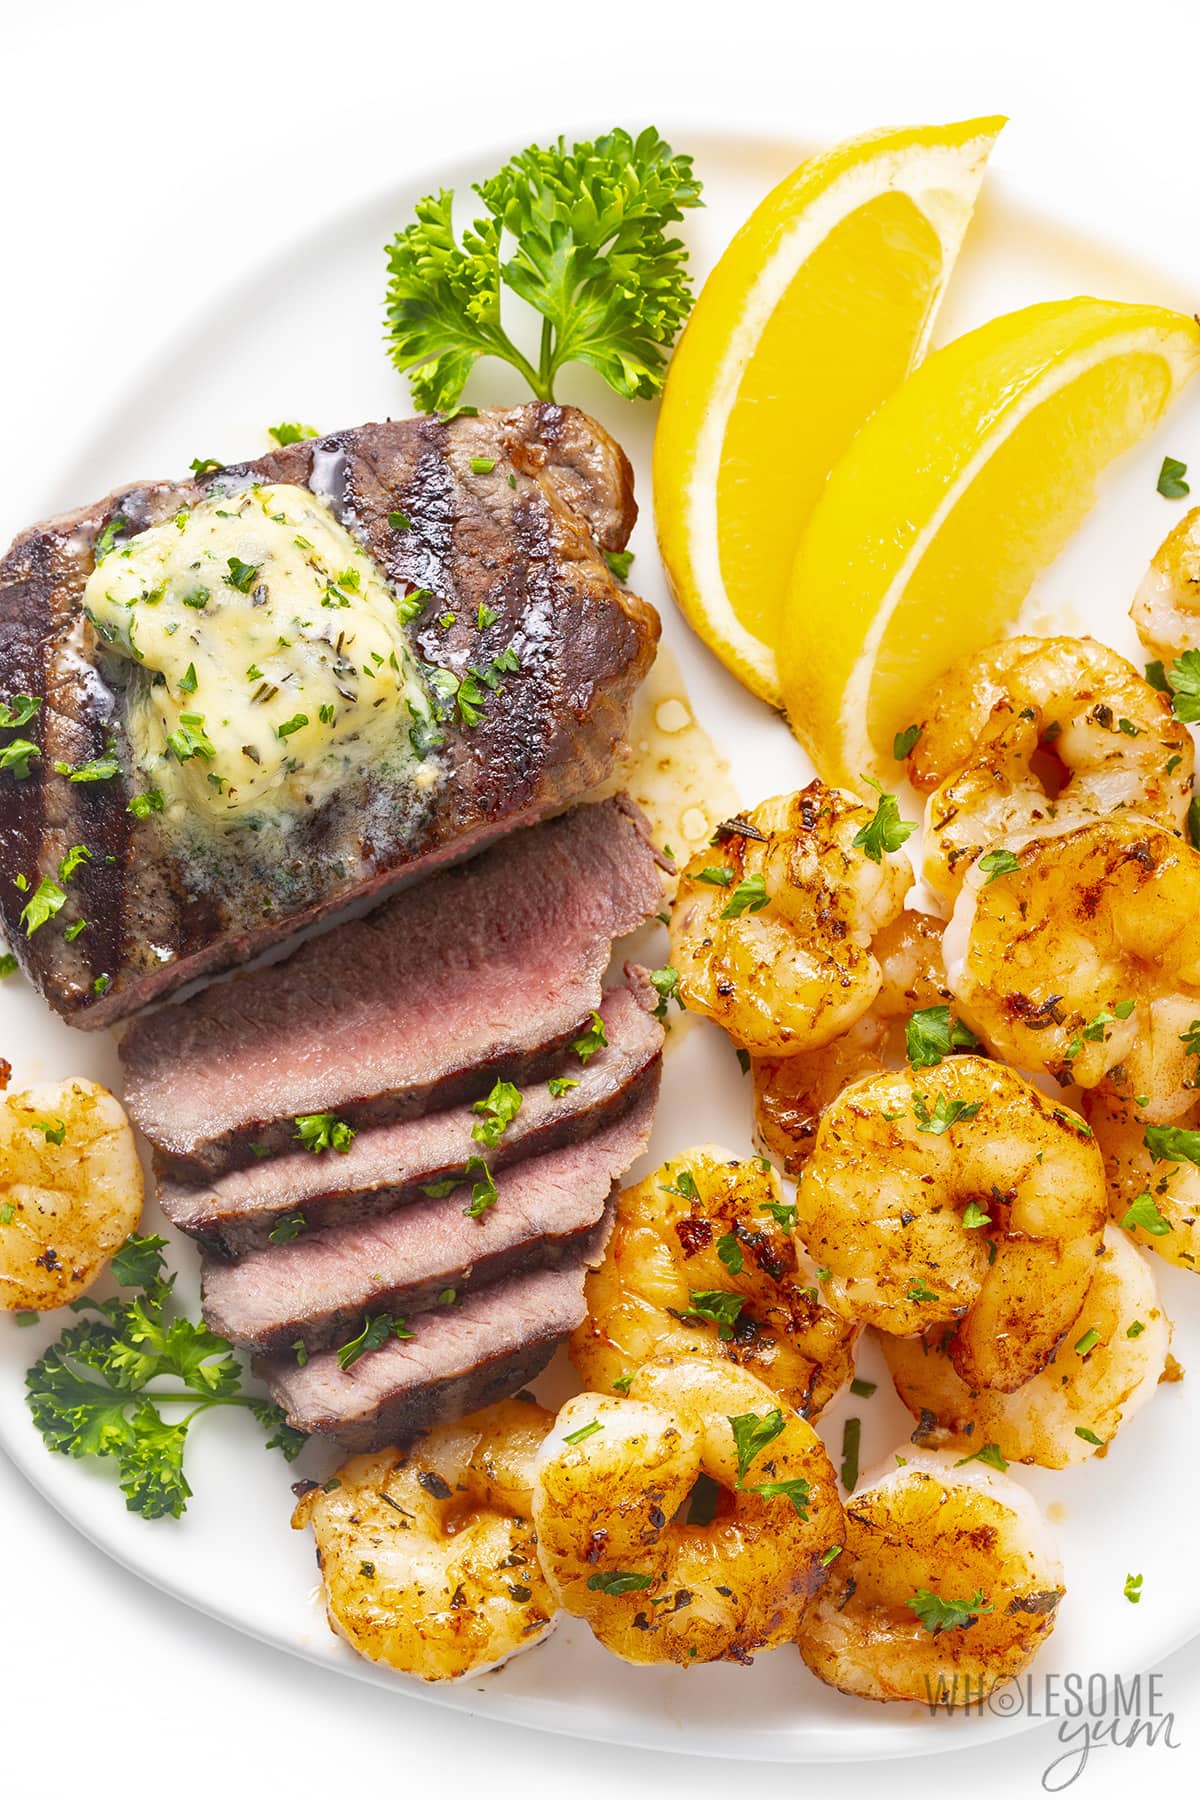 Surf and turf on a plate with the steak sliced.